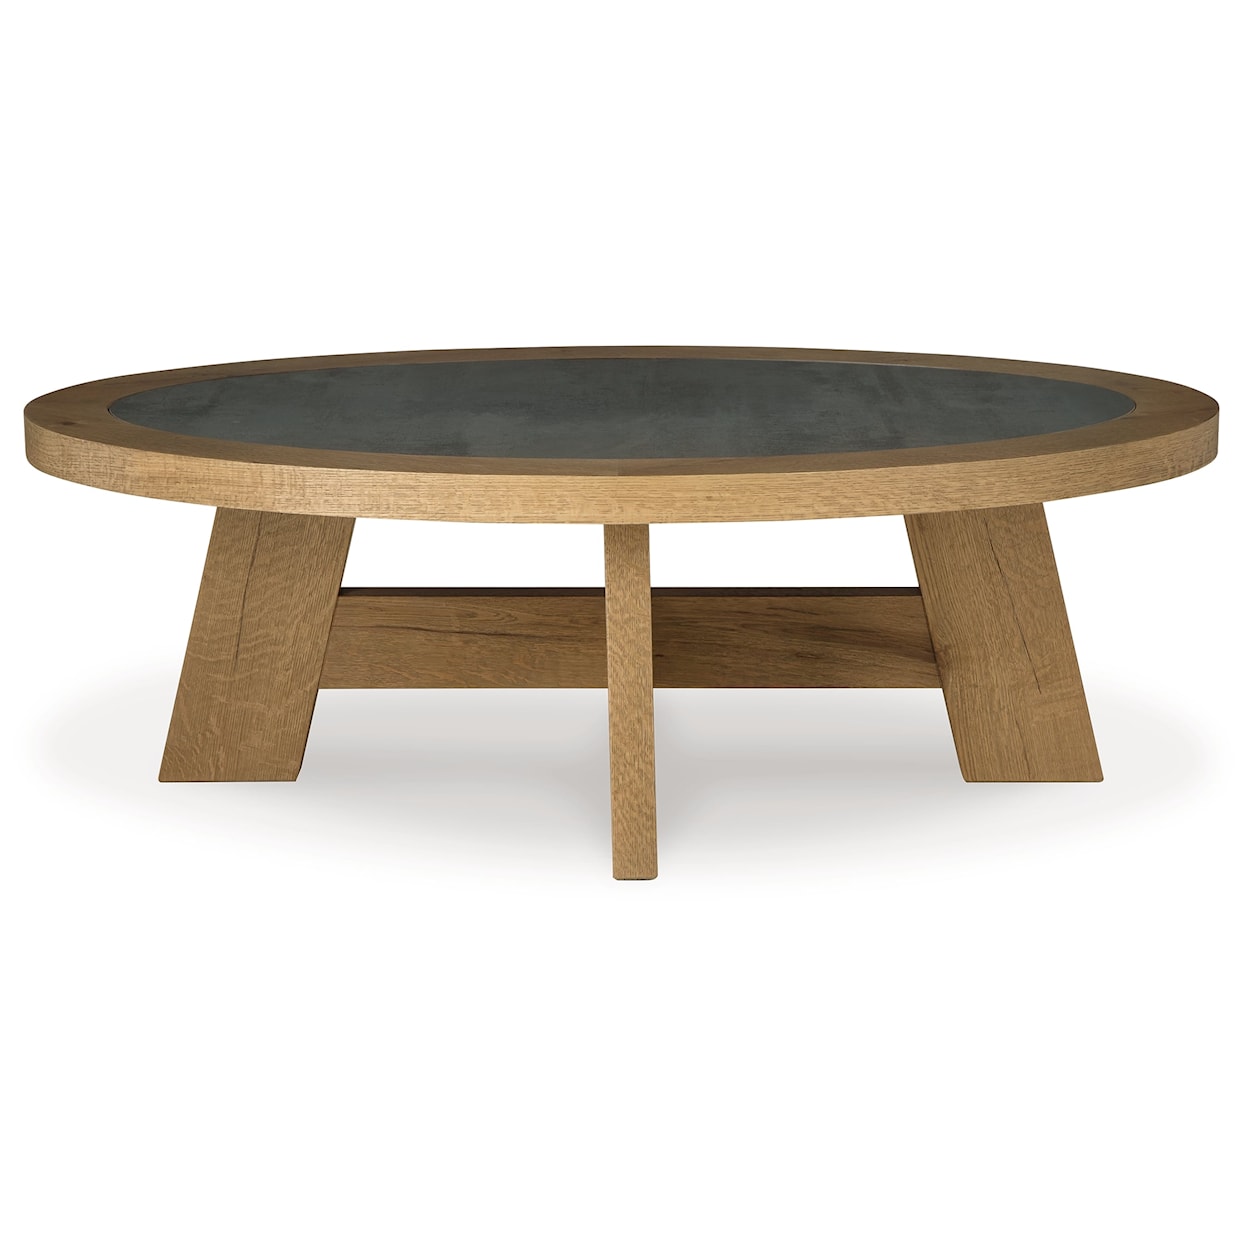 Signature Design by Ashley Furniture Brinstead Oval Cocktail Table